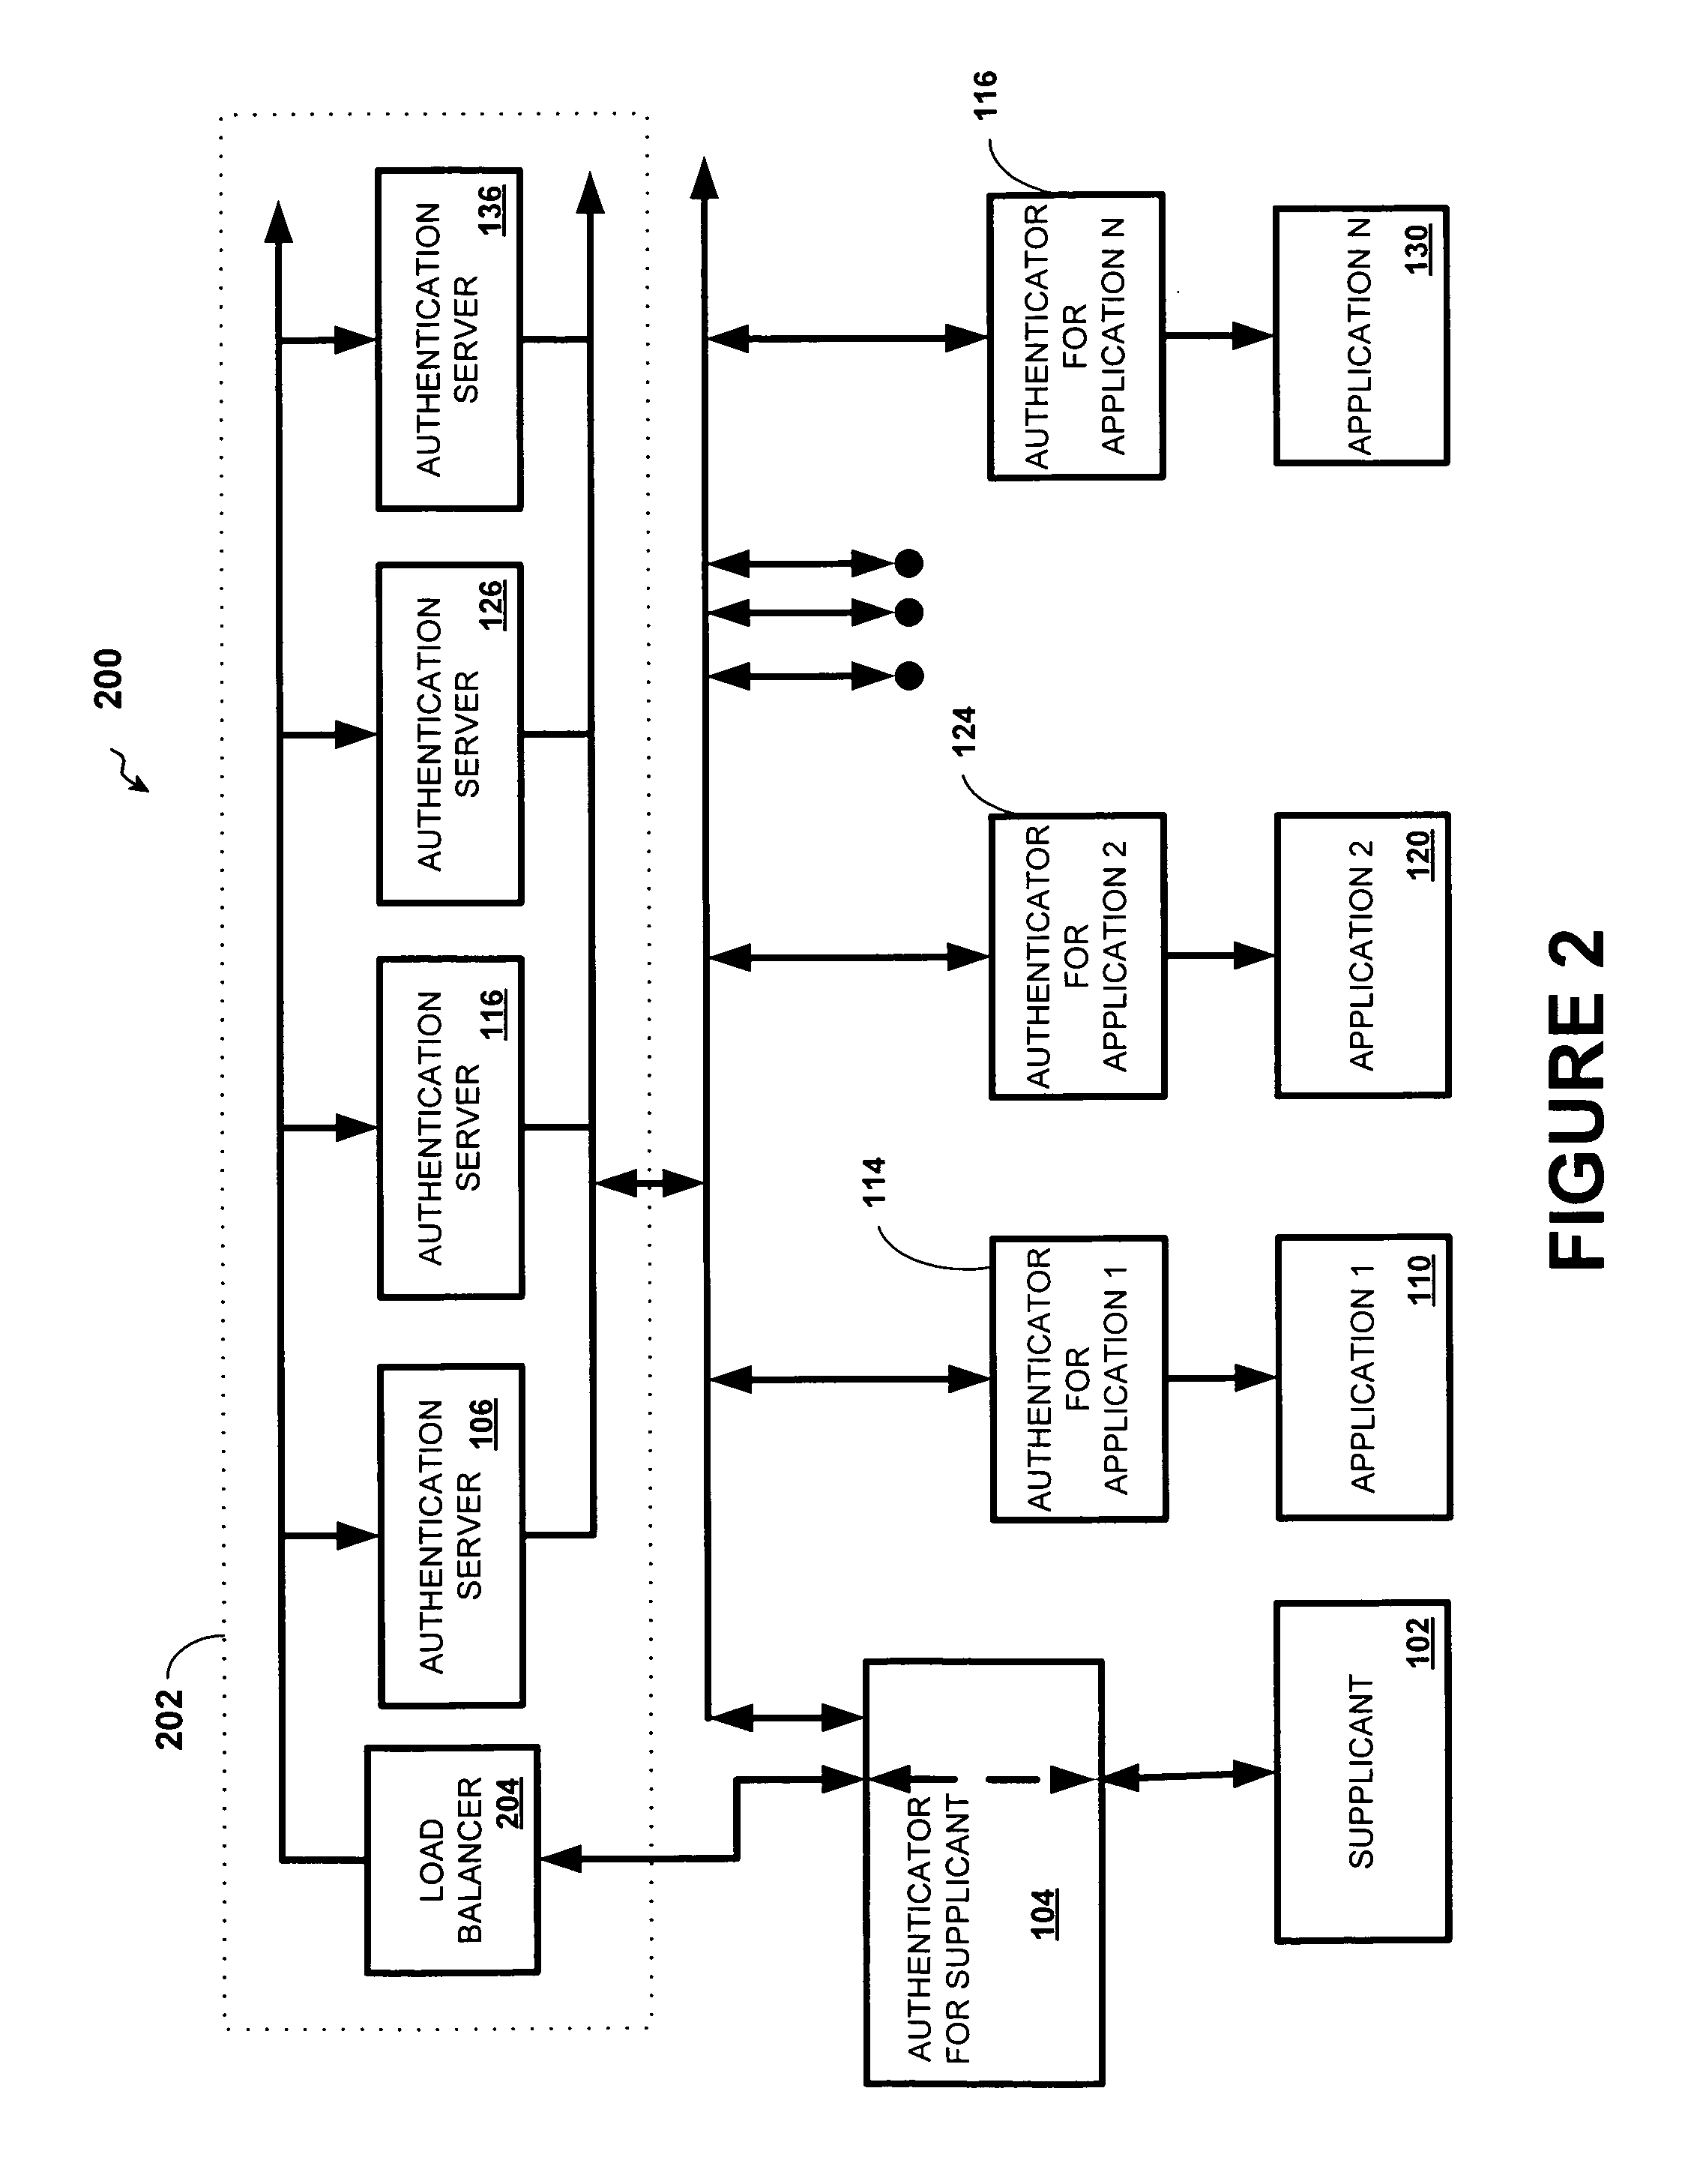 System and method for multi-session establishment involving disjoint authentication and authorization servers